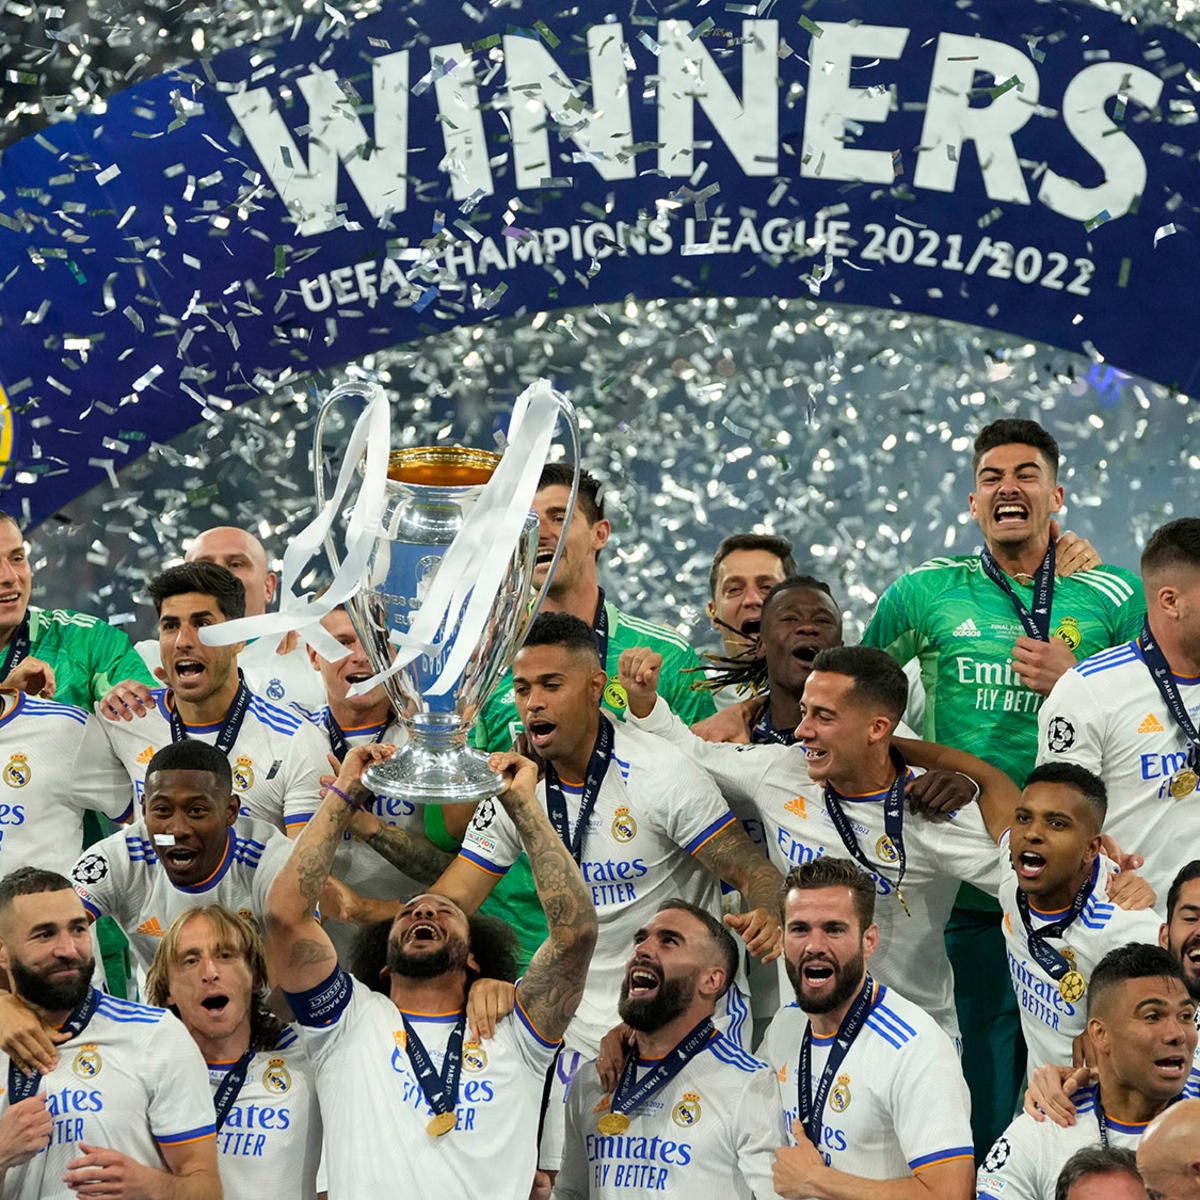 Real Madrid's Champions League title a show of its inevitability - Sports Illustrated